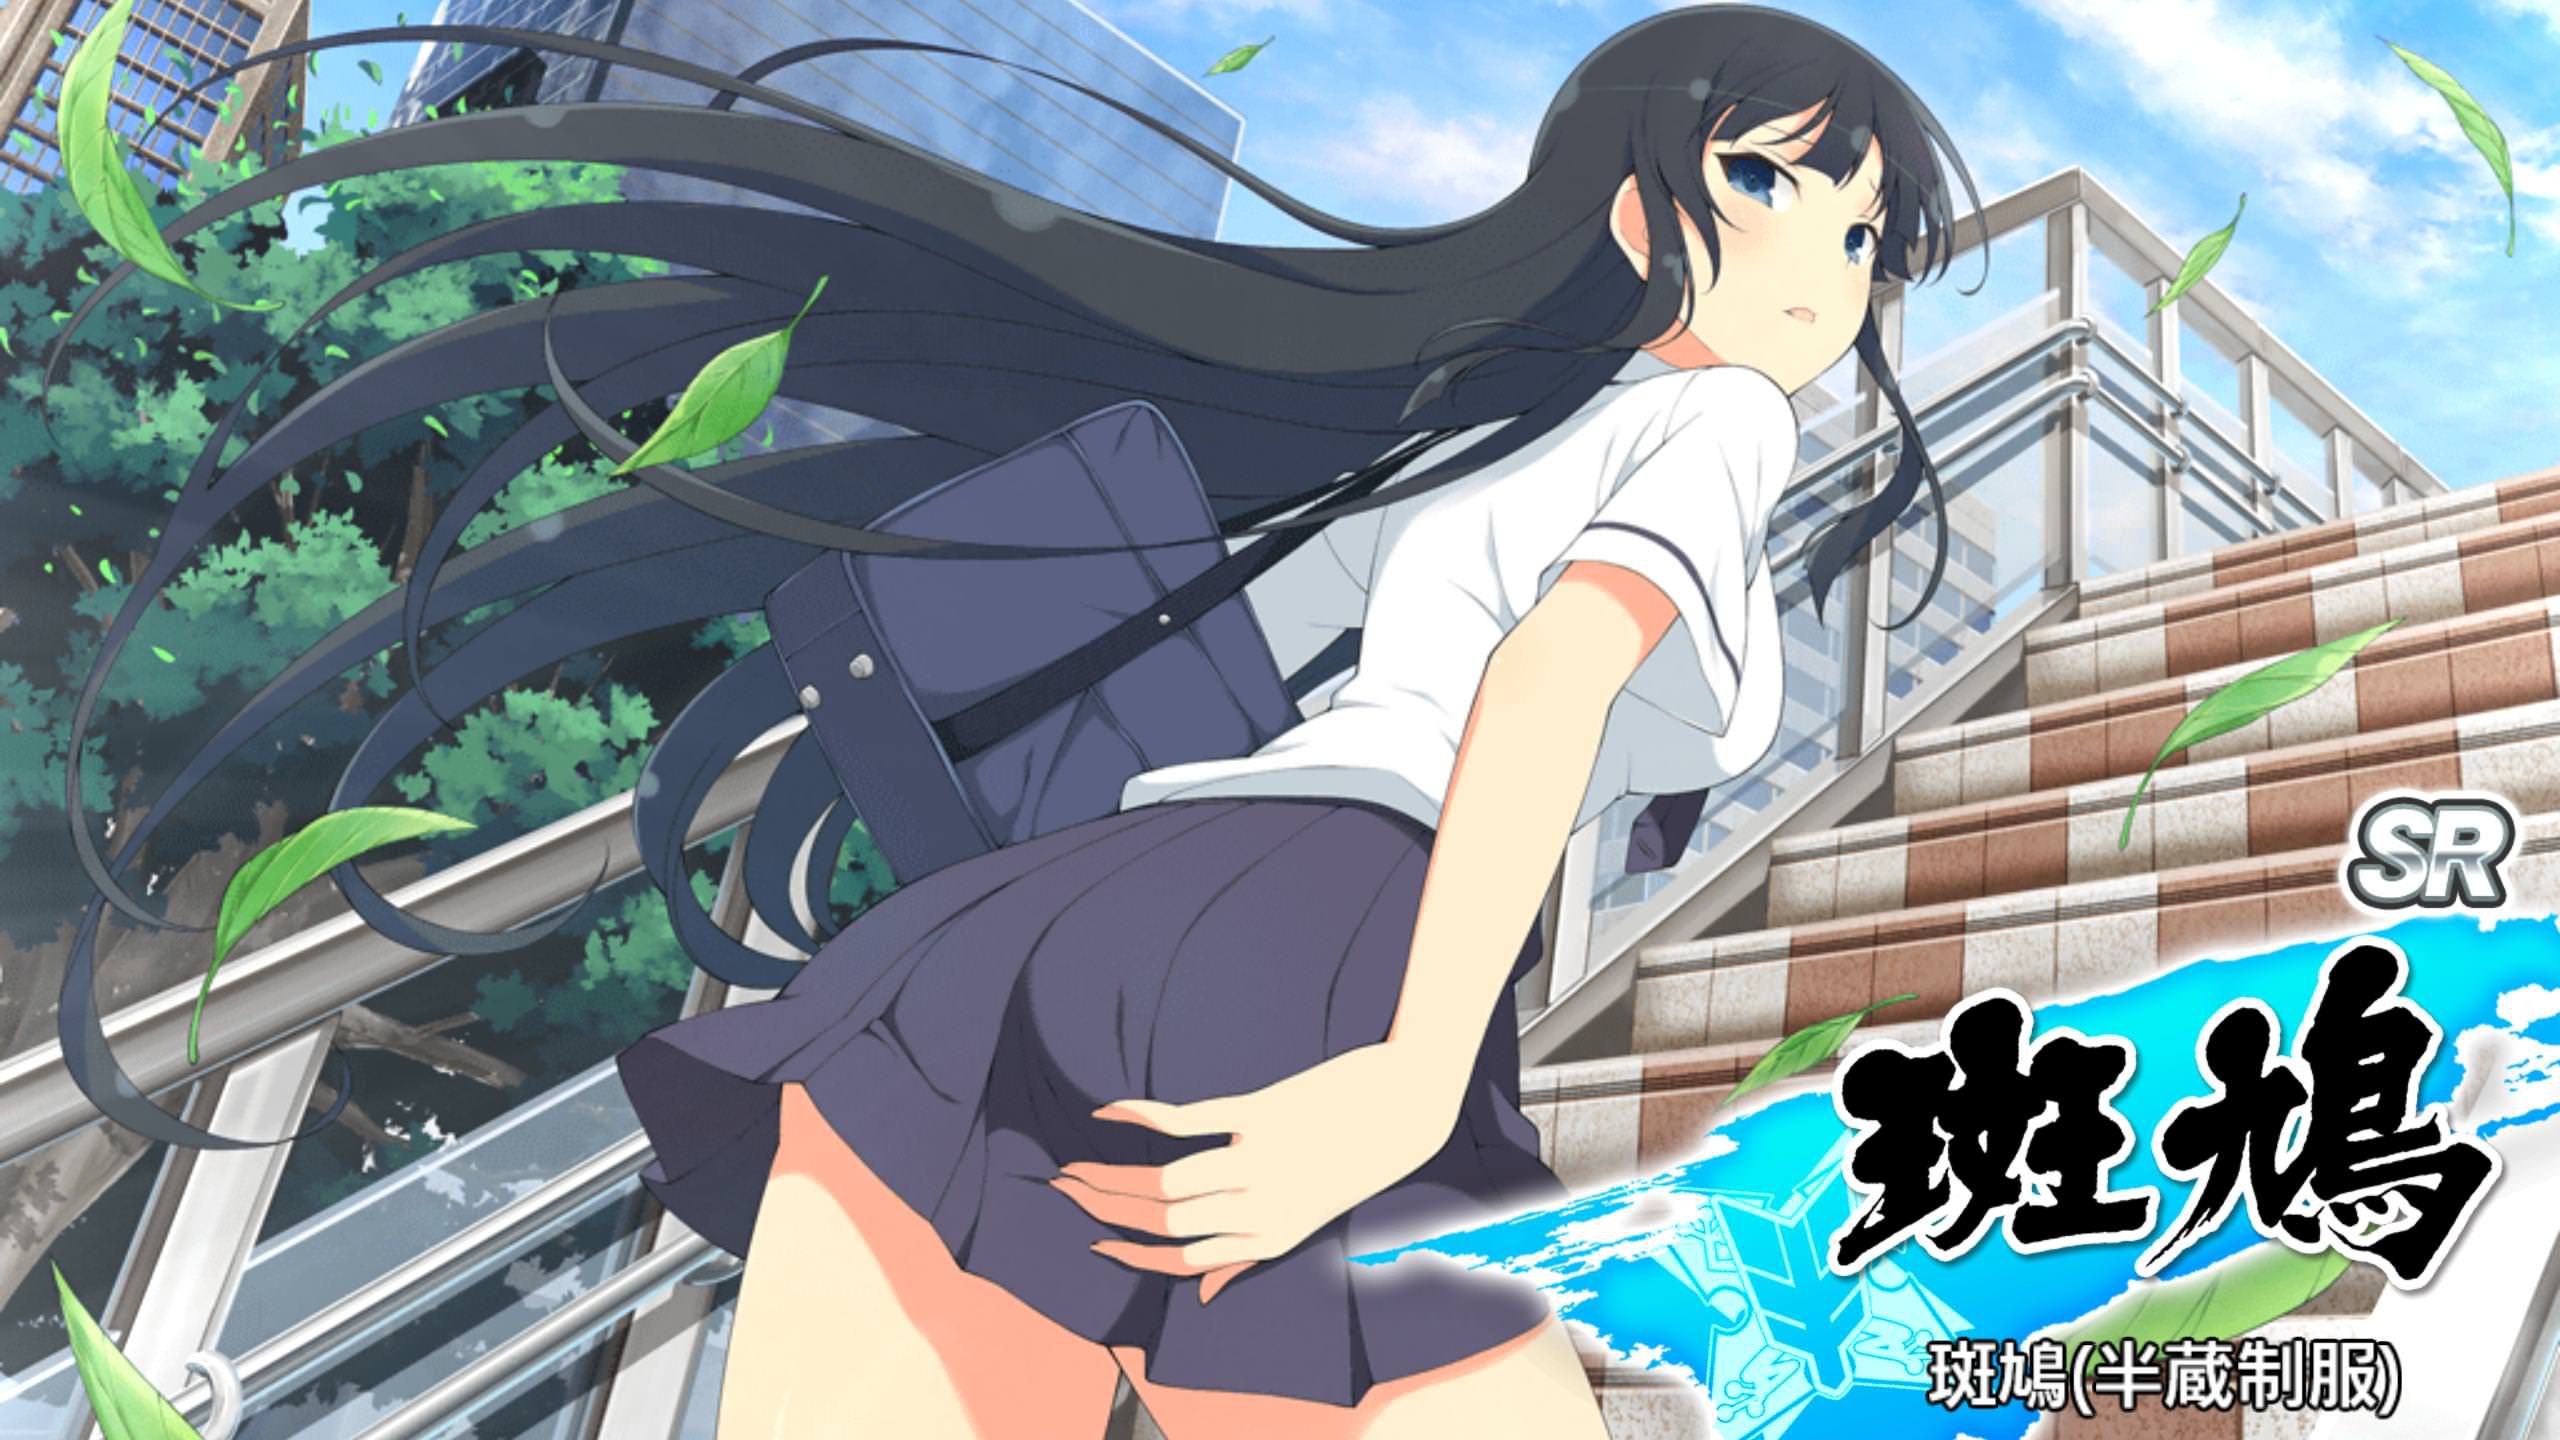 "Ikaruga" ← The average person who can read this is 8% but those who like naughty games are all readable kanji wwwwww 13